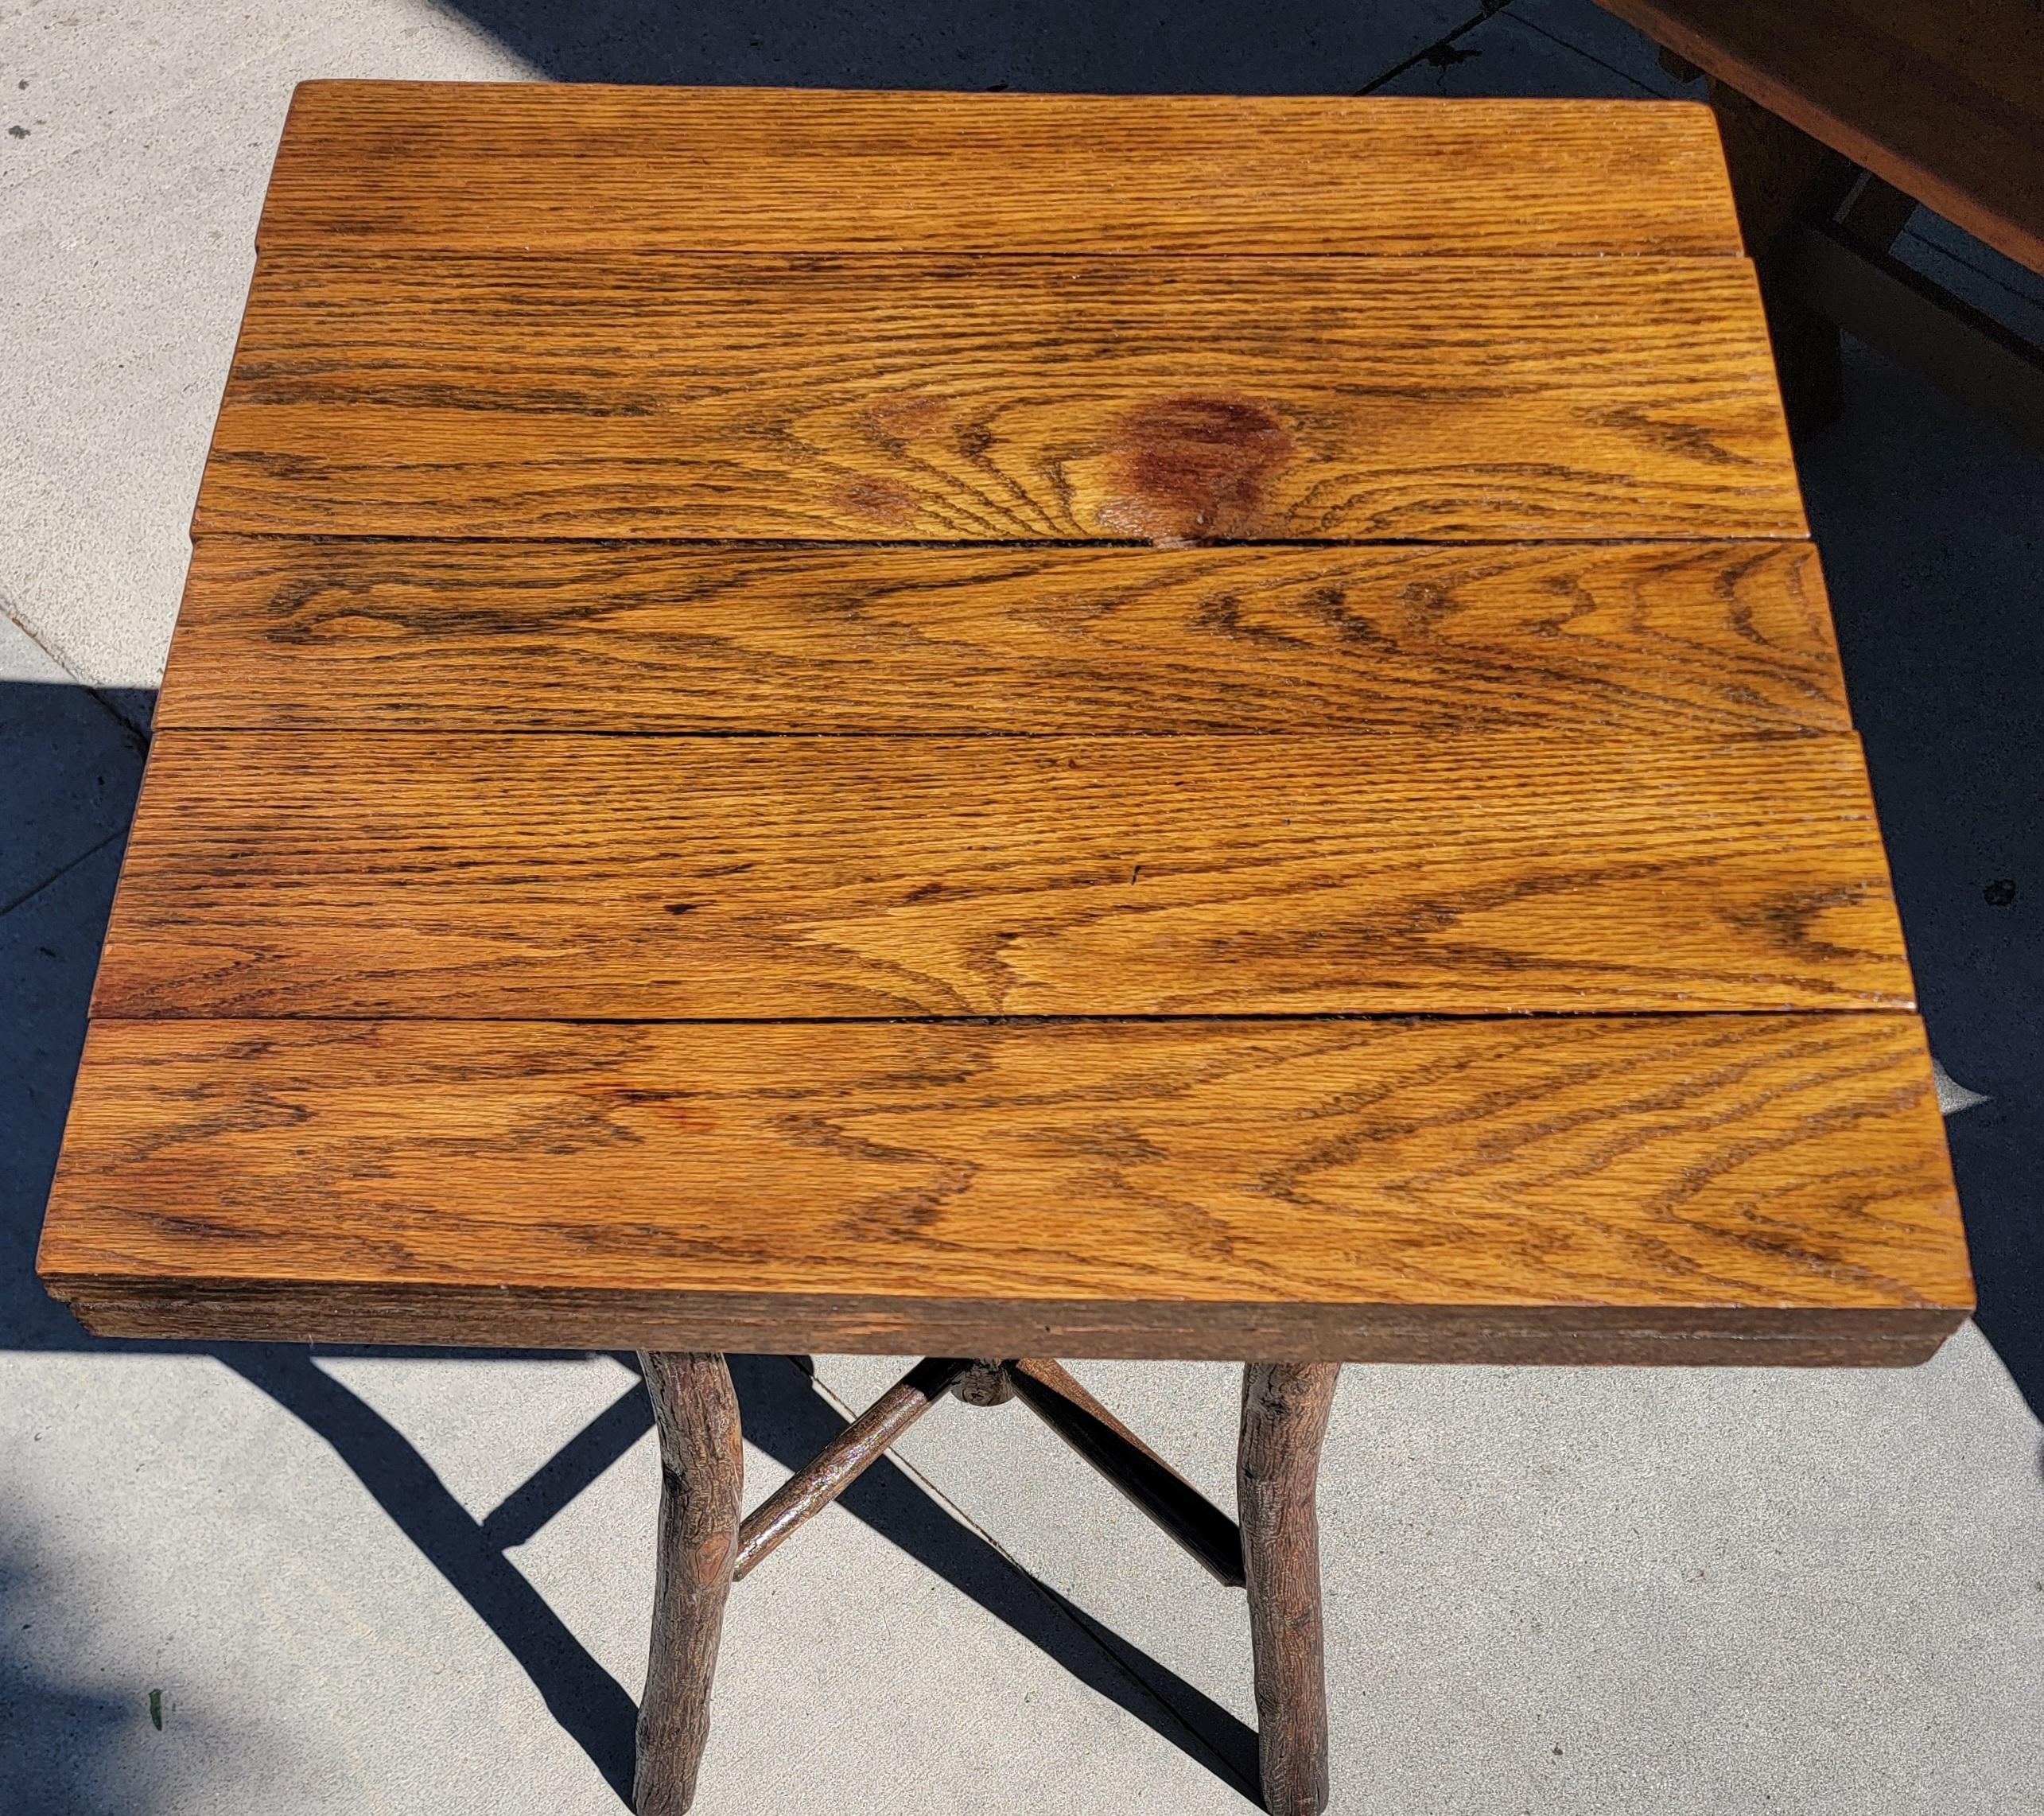 The lamp table has an oak top and flared hickory pole legs with spoke stretchers and an Old Hickory Bruce tag. Made by the Old Hickory Company in Martinsville, Indiana .The table is very strong and sturdy.